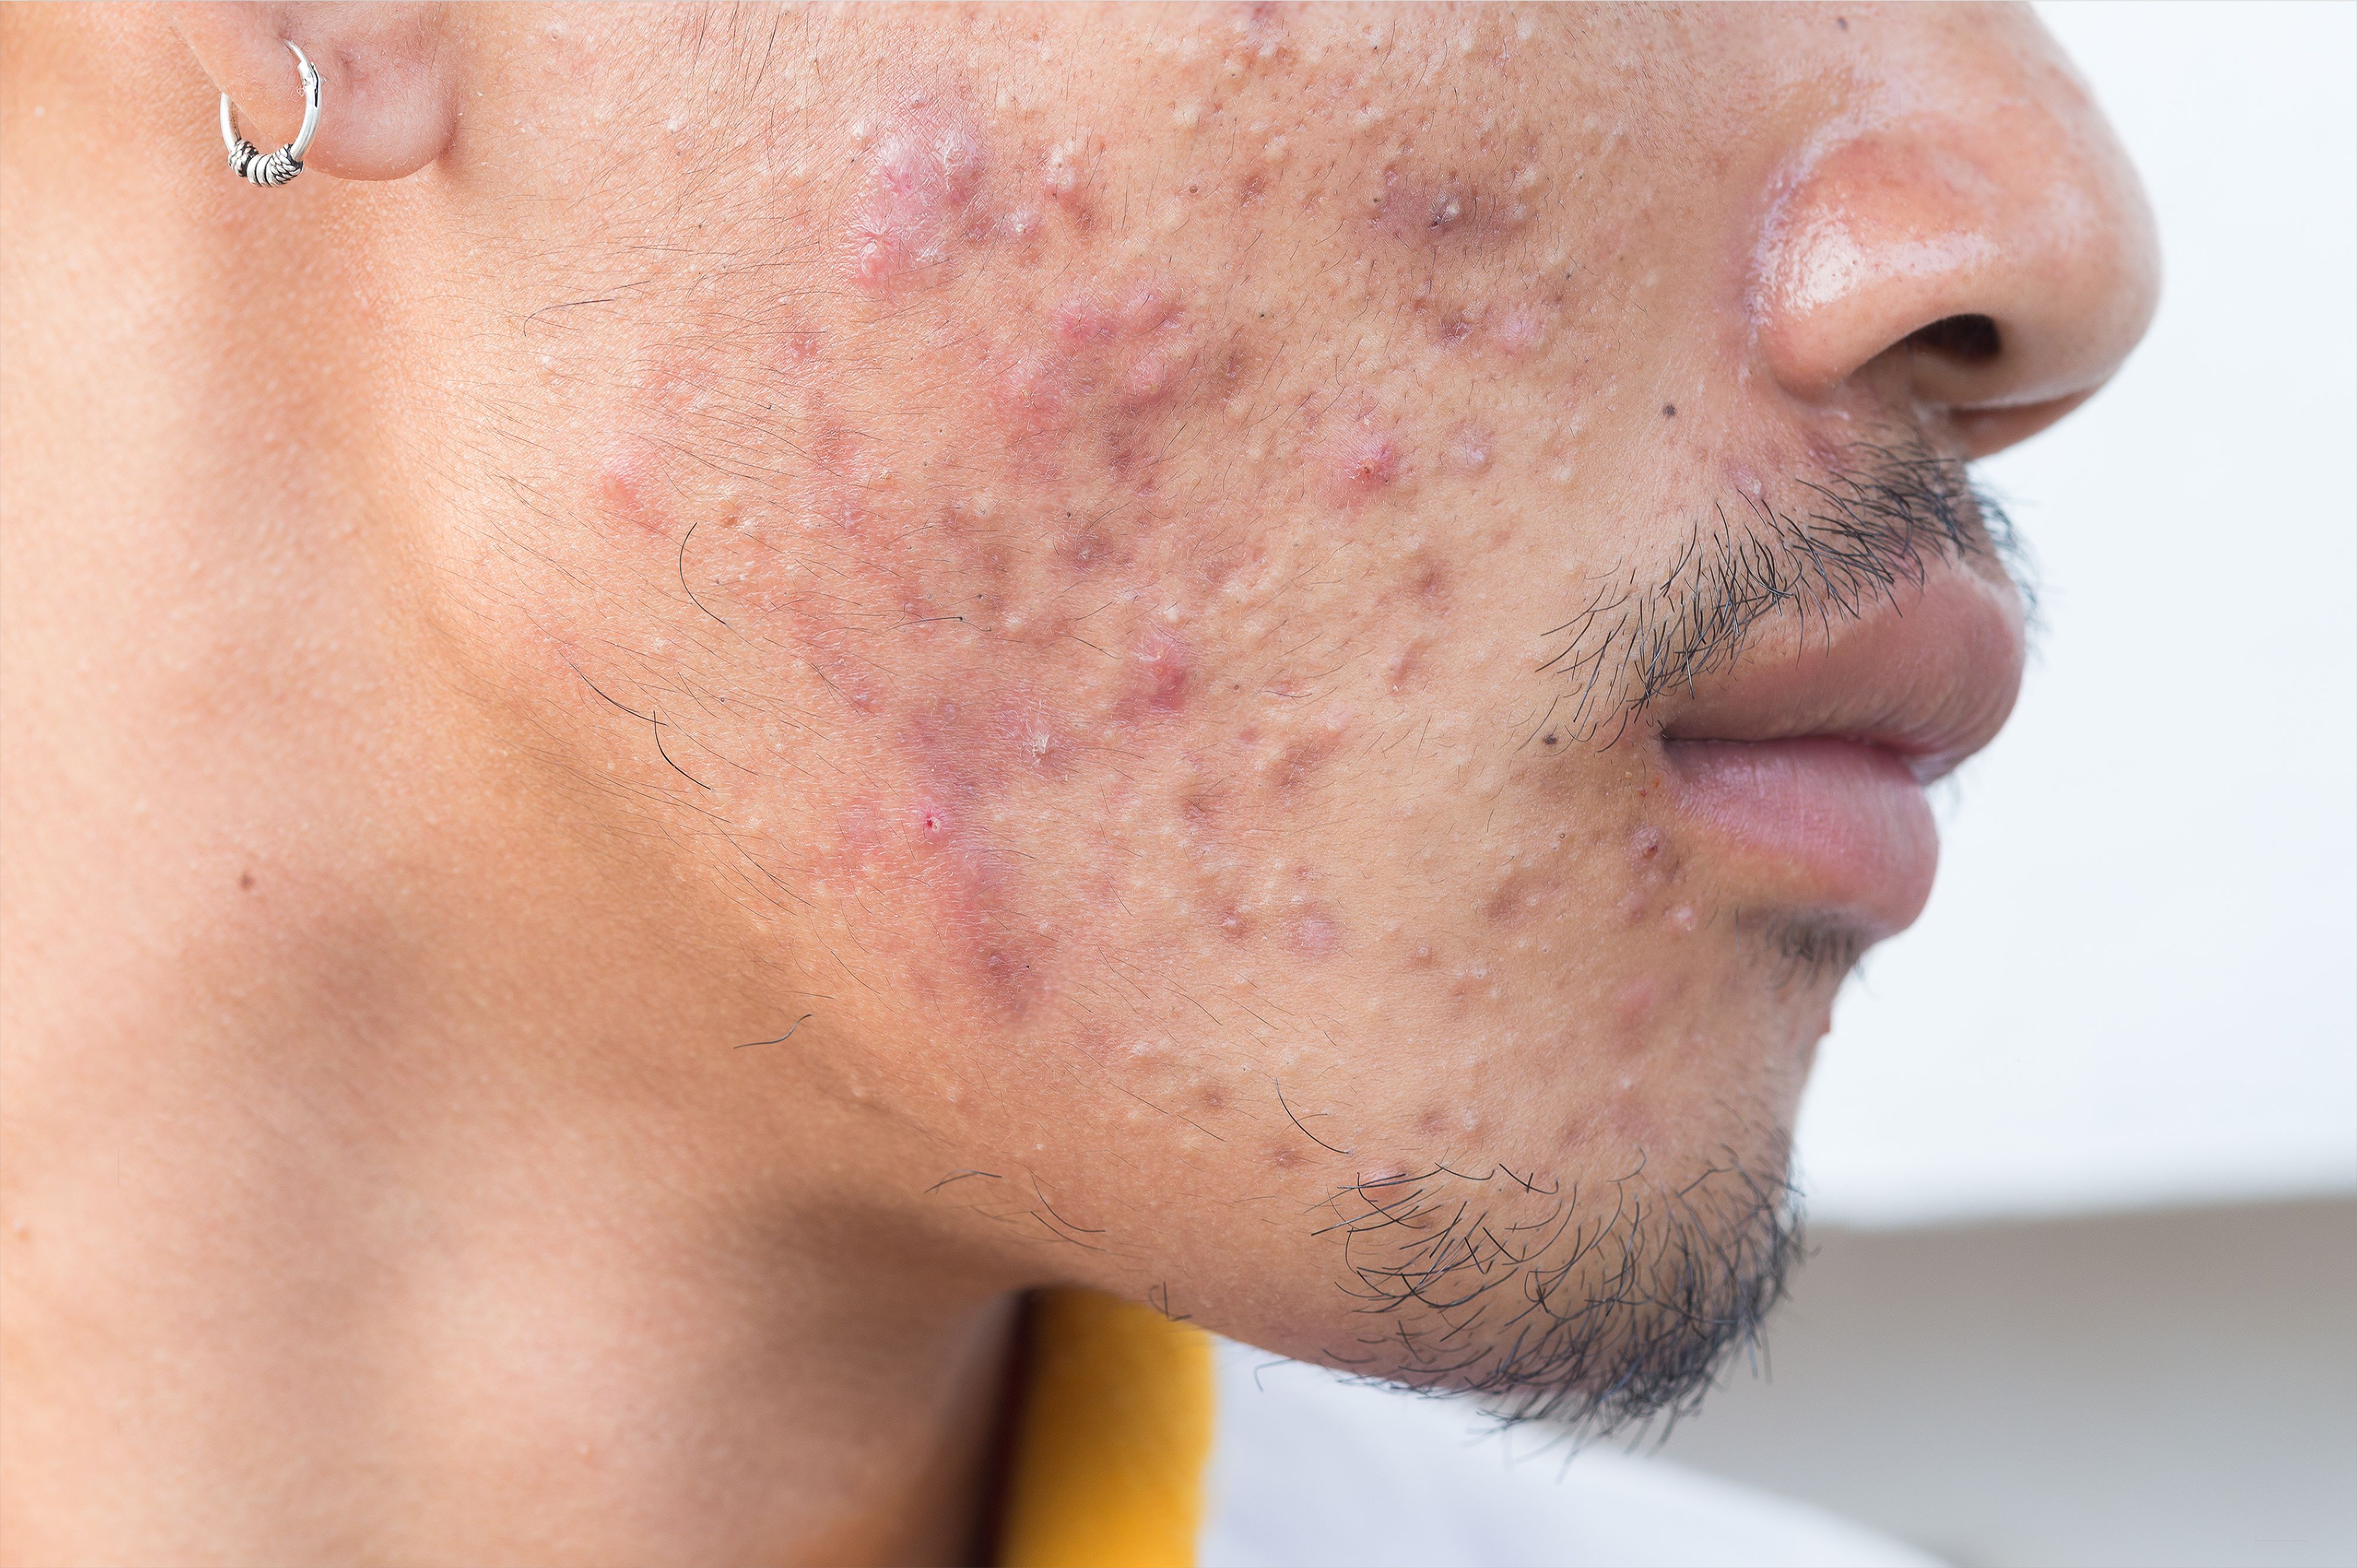 Newly Discovered Antimicrobial Fat Cells May Offer New Treatment Options for Acne